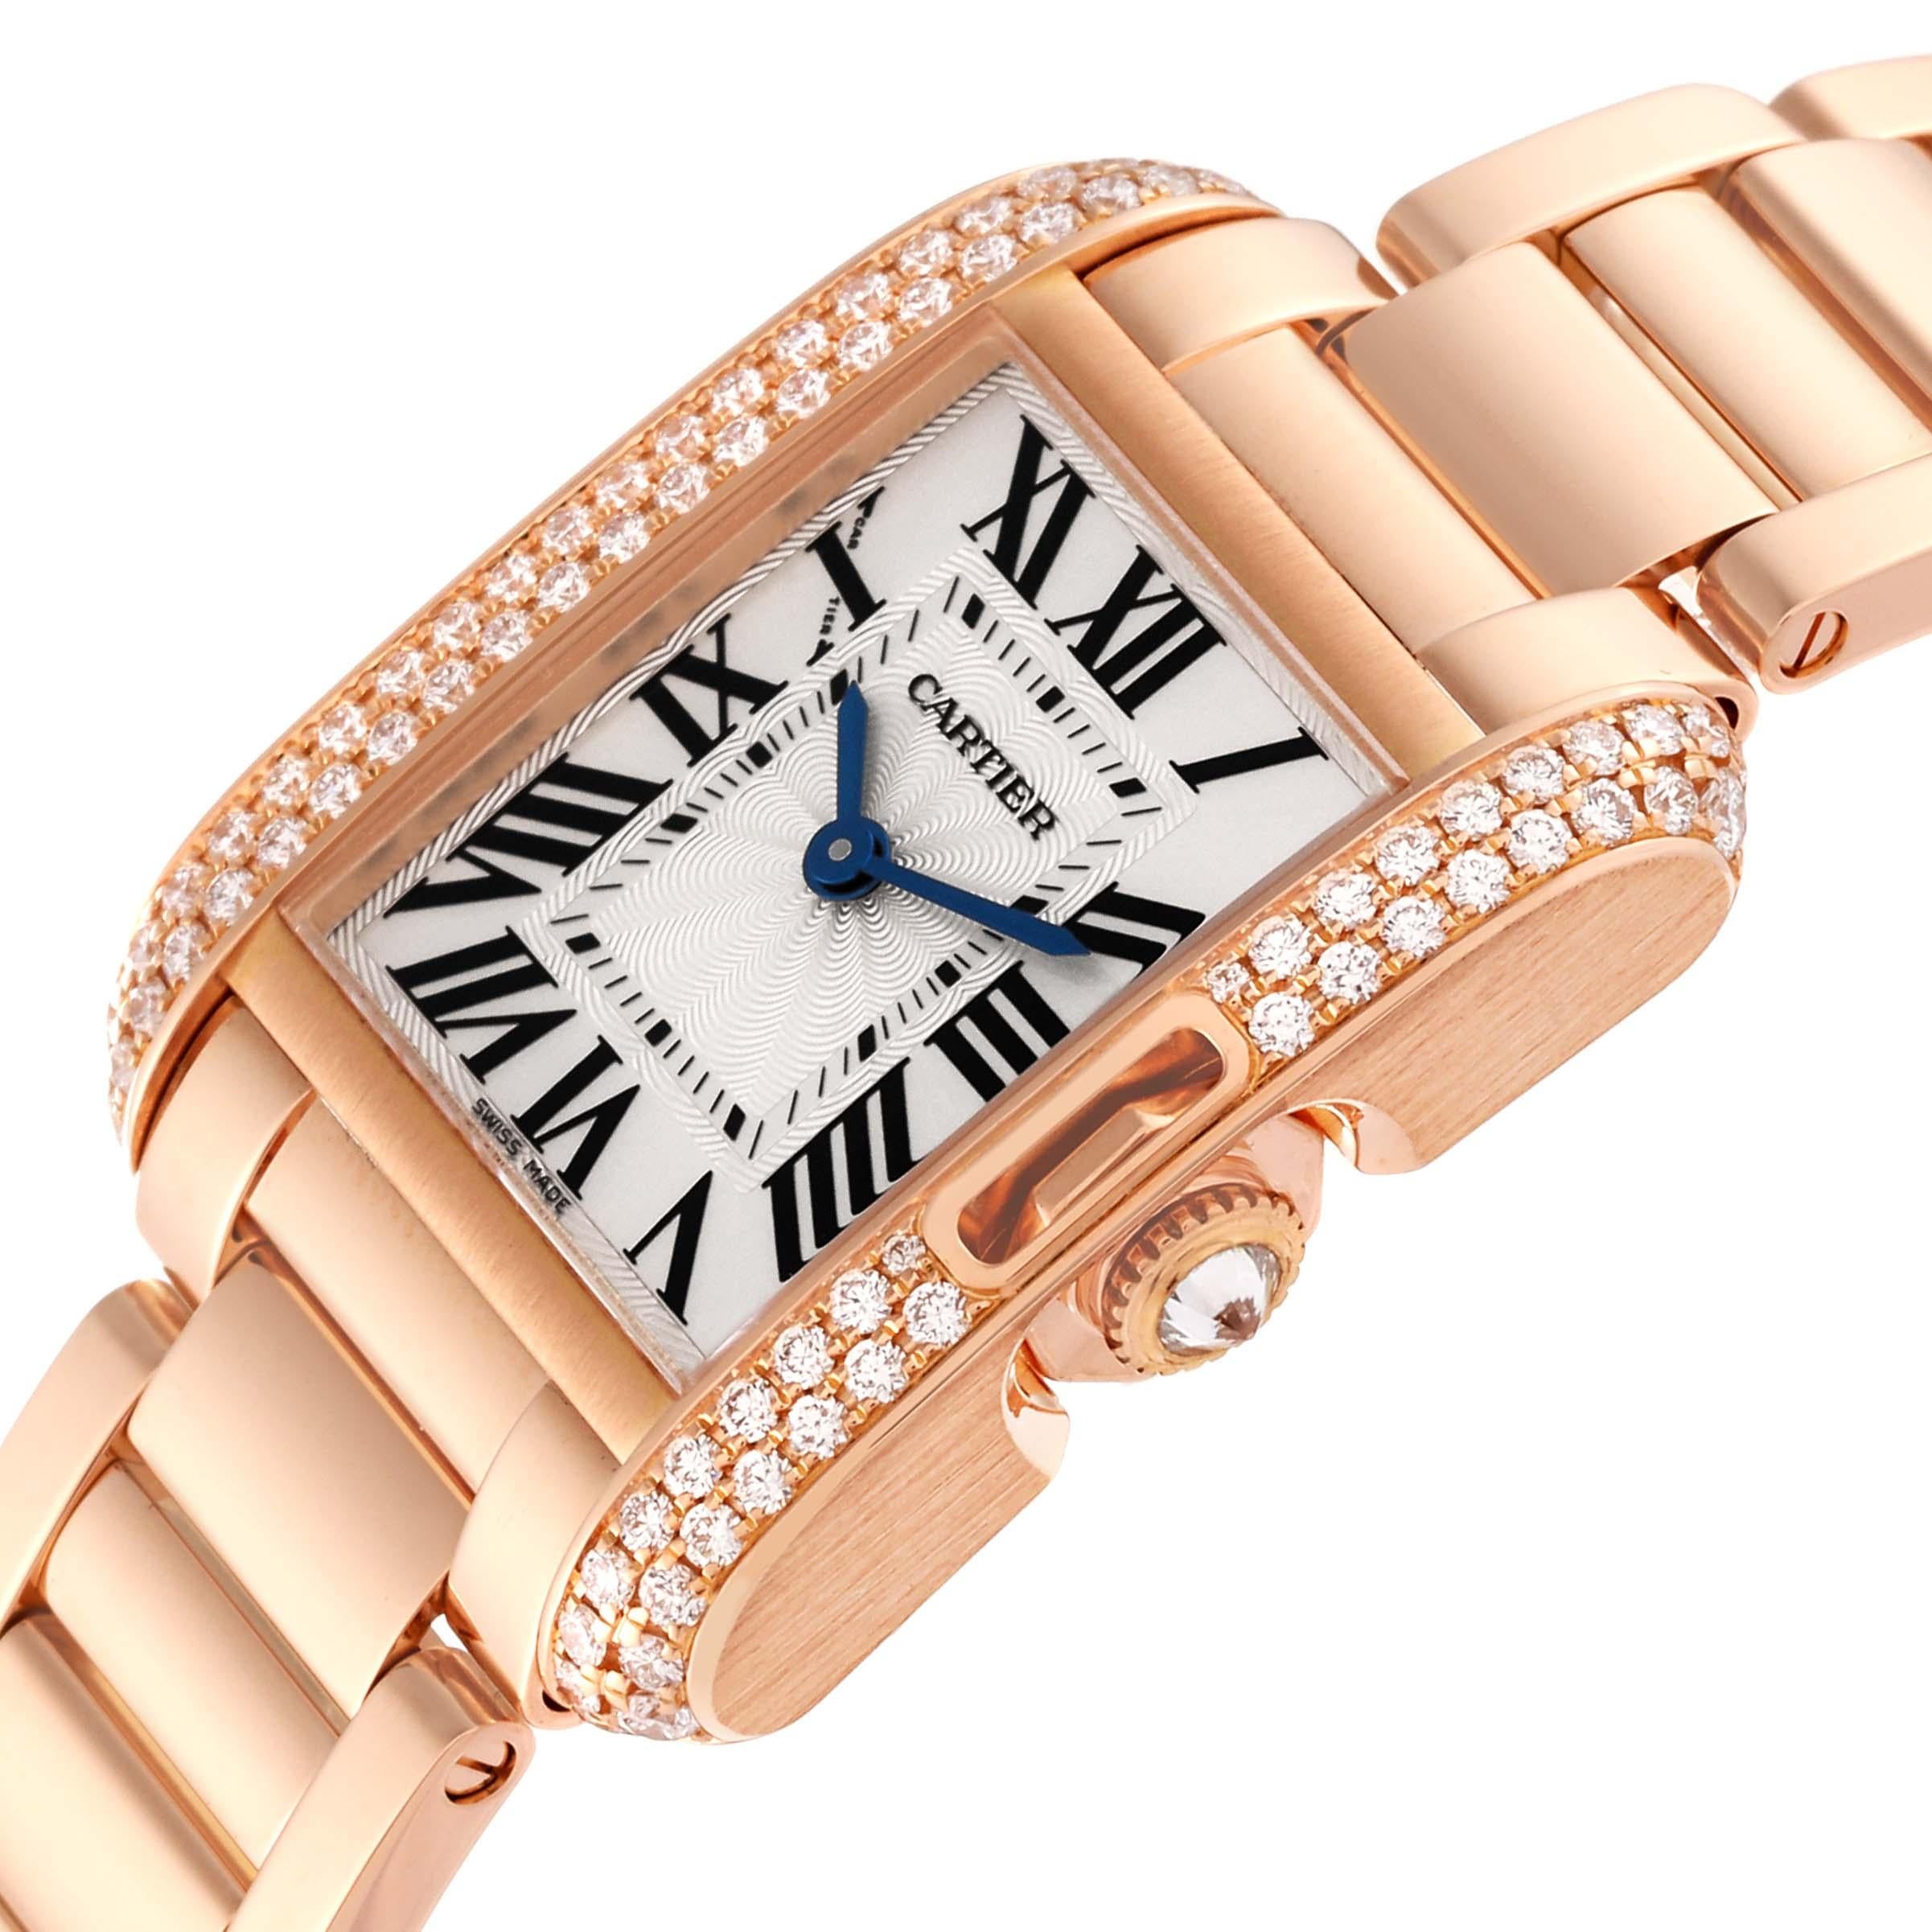 Cartier Tank Anglaise Rose Gold Silver Dial Diamond Ladies Watch WT100002 For Sale 1